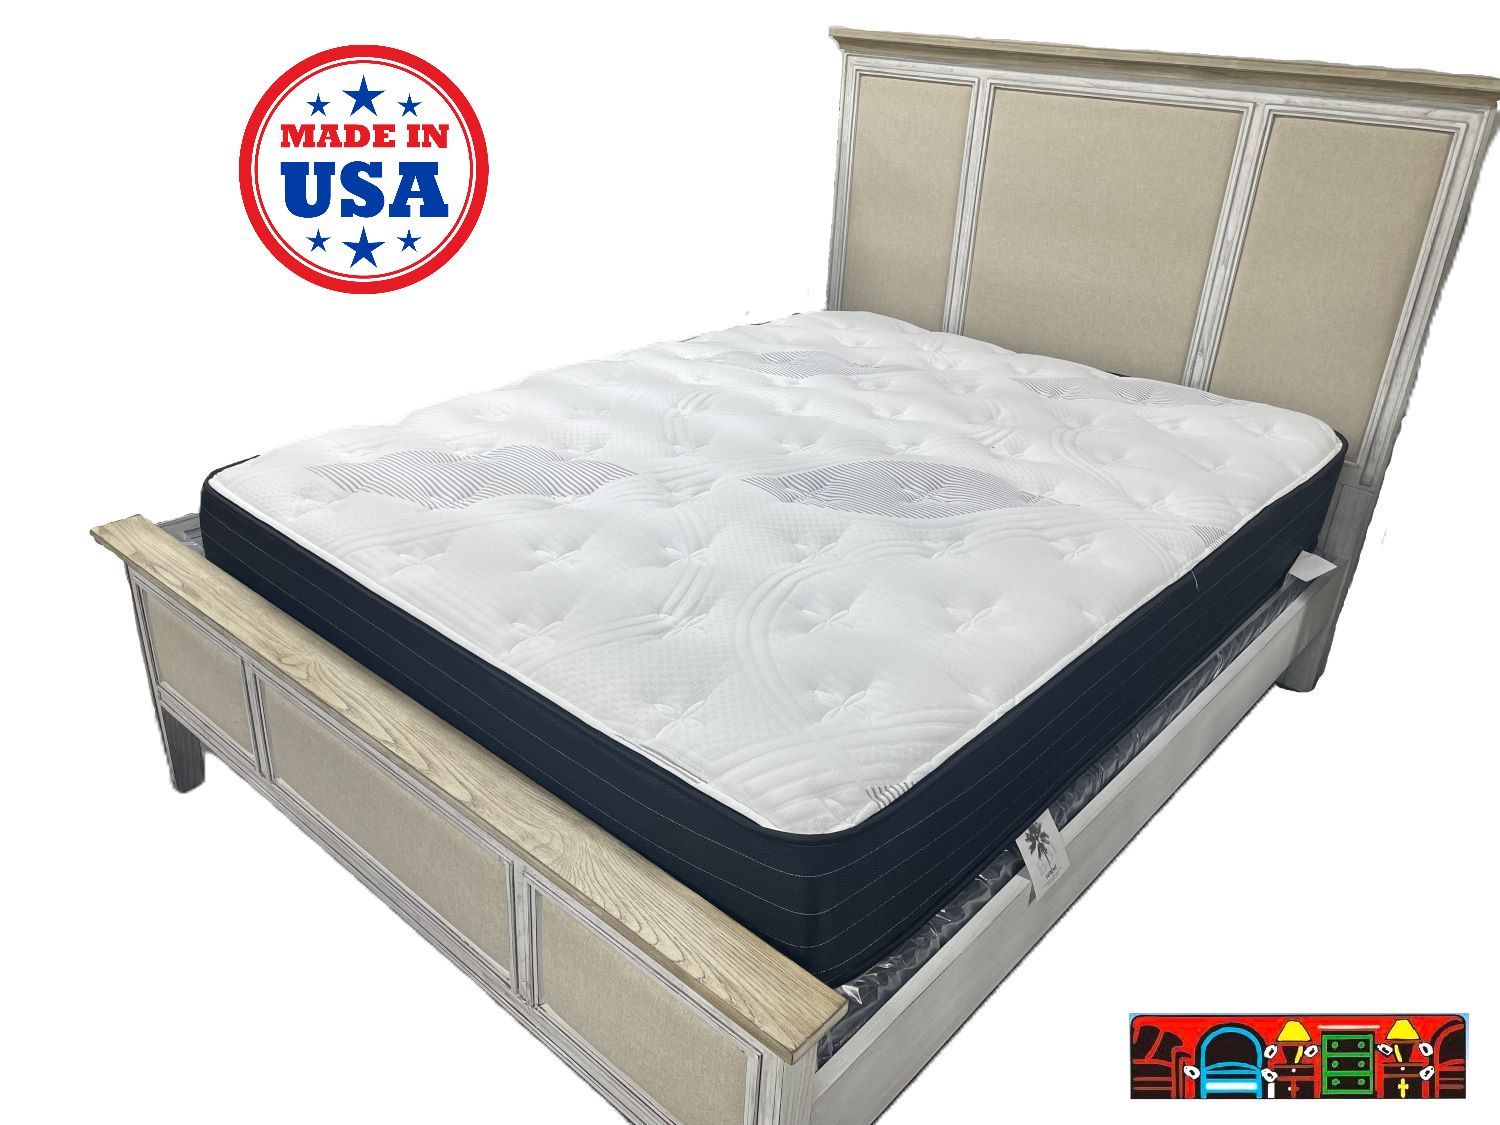 The Serene Medium Firm two-side Resort Collection mattress by Biscayne Bedding can be found at Bratz-CFW located in Fort Myers, FL.